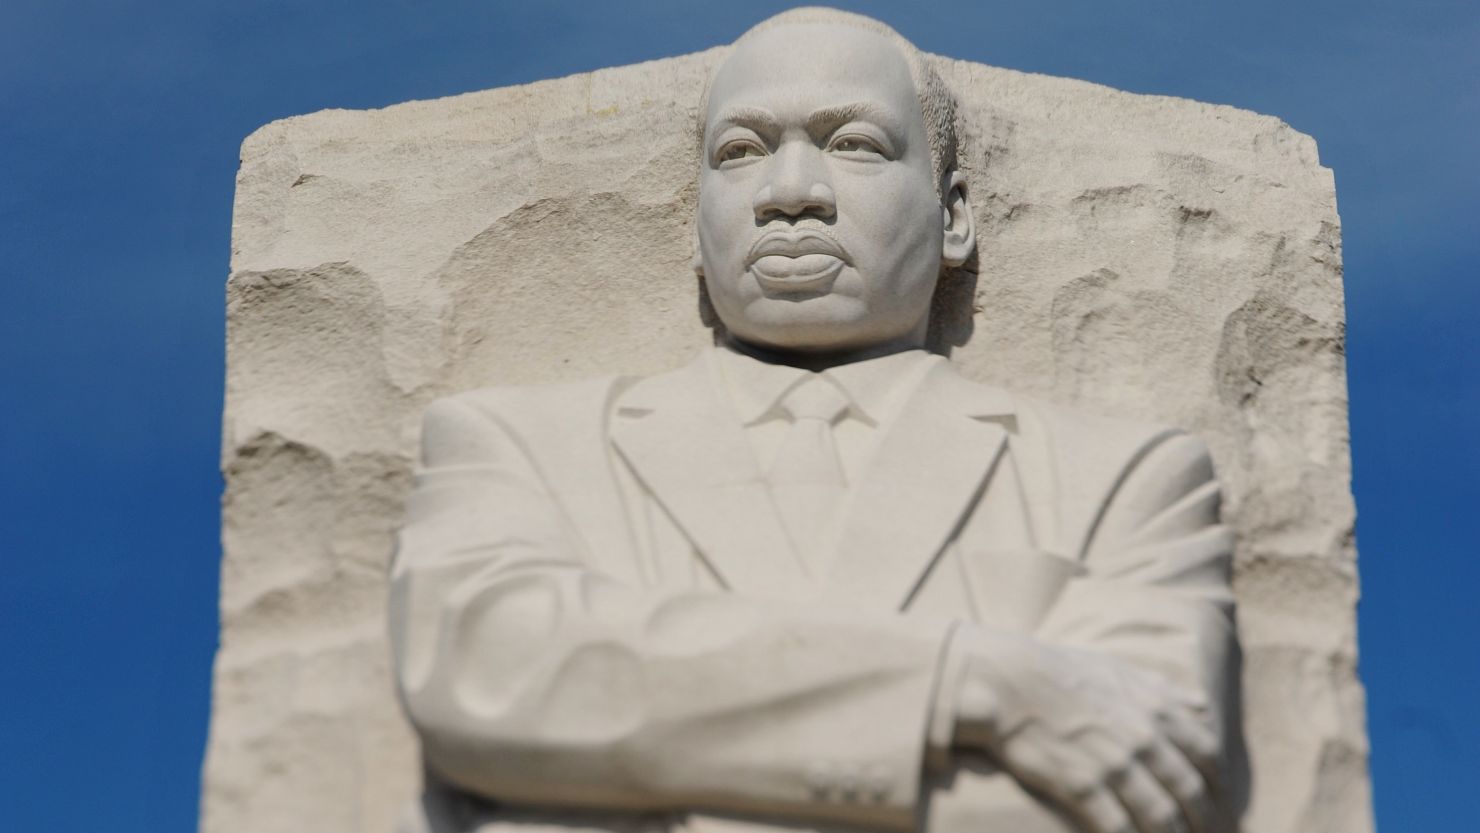 Martin Luther King Jr.'s  civil rights movement began in Alabama, and the authors say the state is denying civil rights again.